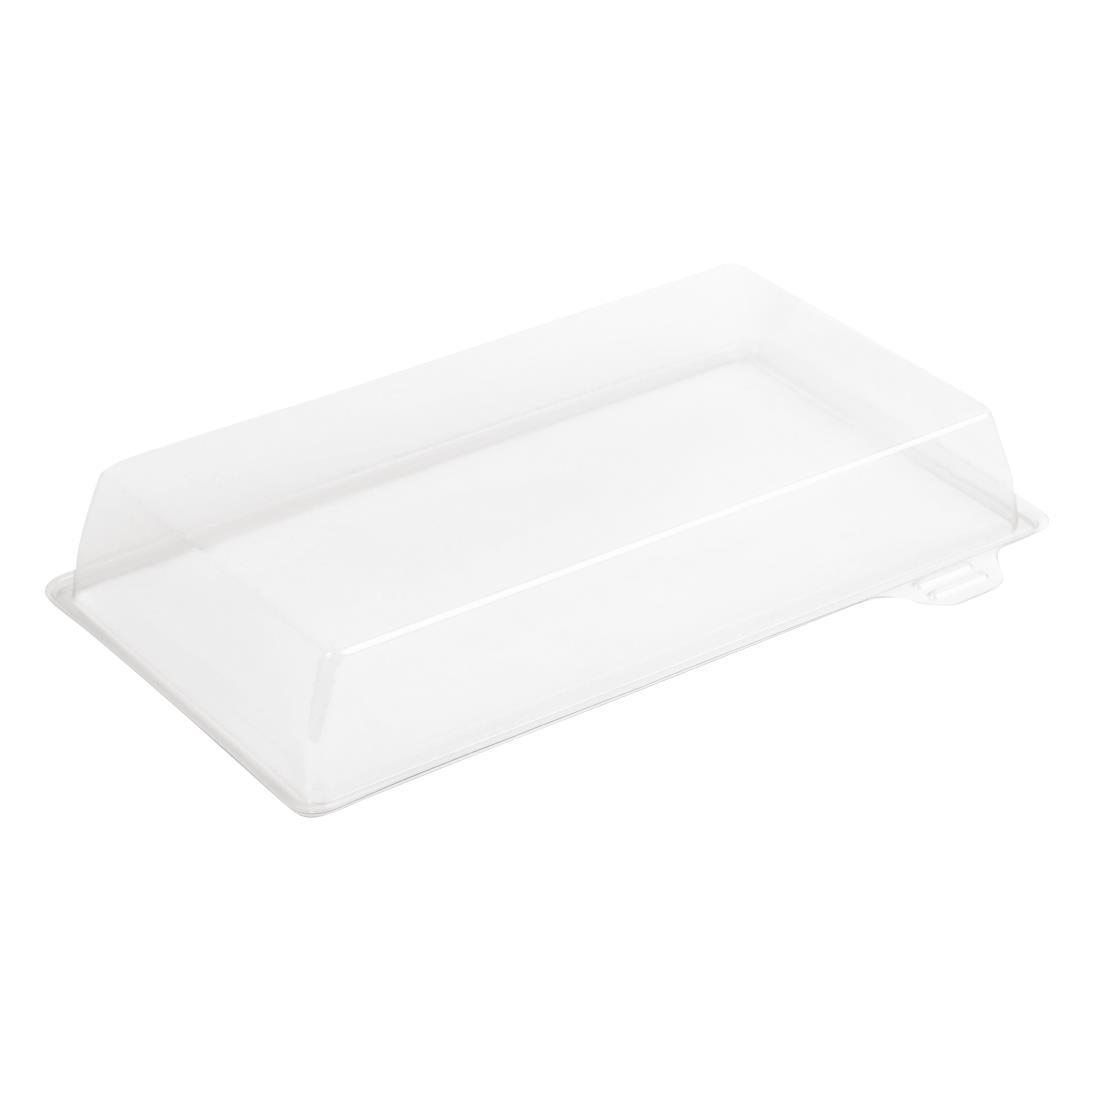 Faerch Medium Recyclable Sushi Tray Lids 165 x 110mm (Pack of 900) - FB297  - 1